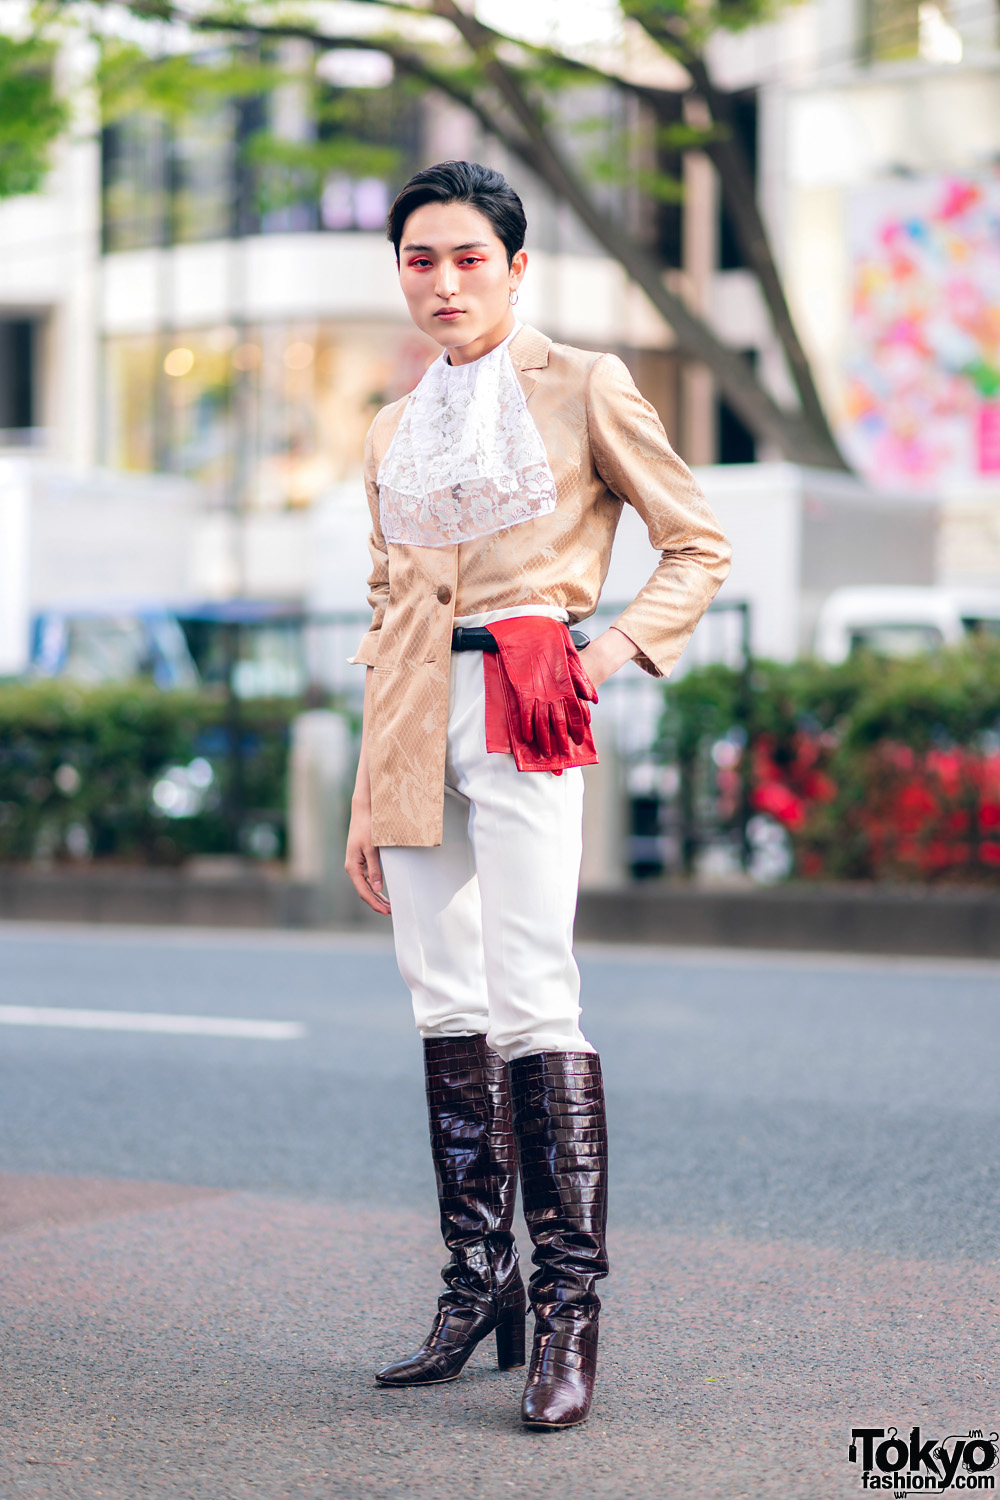 Vintage Equestrian-Inspired Japanese Street Style w/ Red Eye Makeup, Lace Cravat, Red Gloves & Crocodile Boots